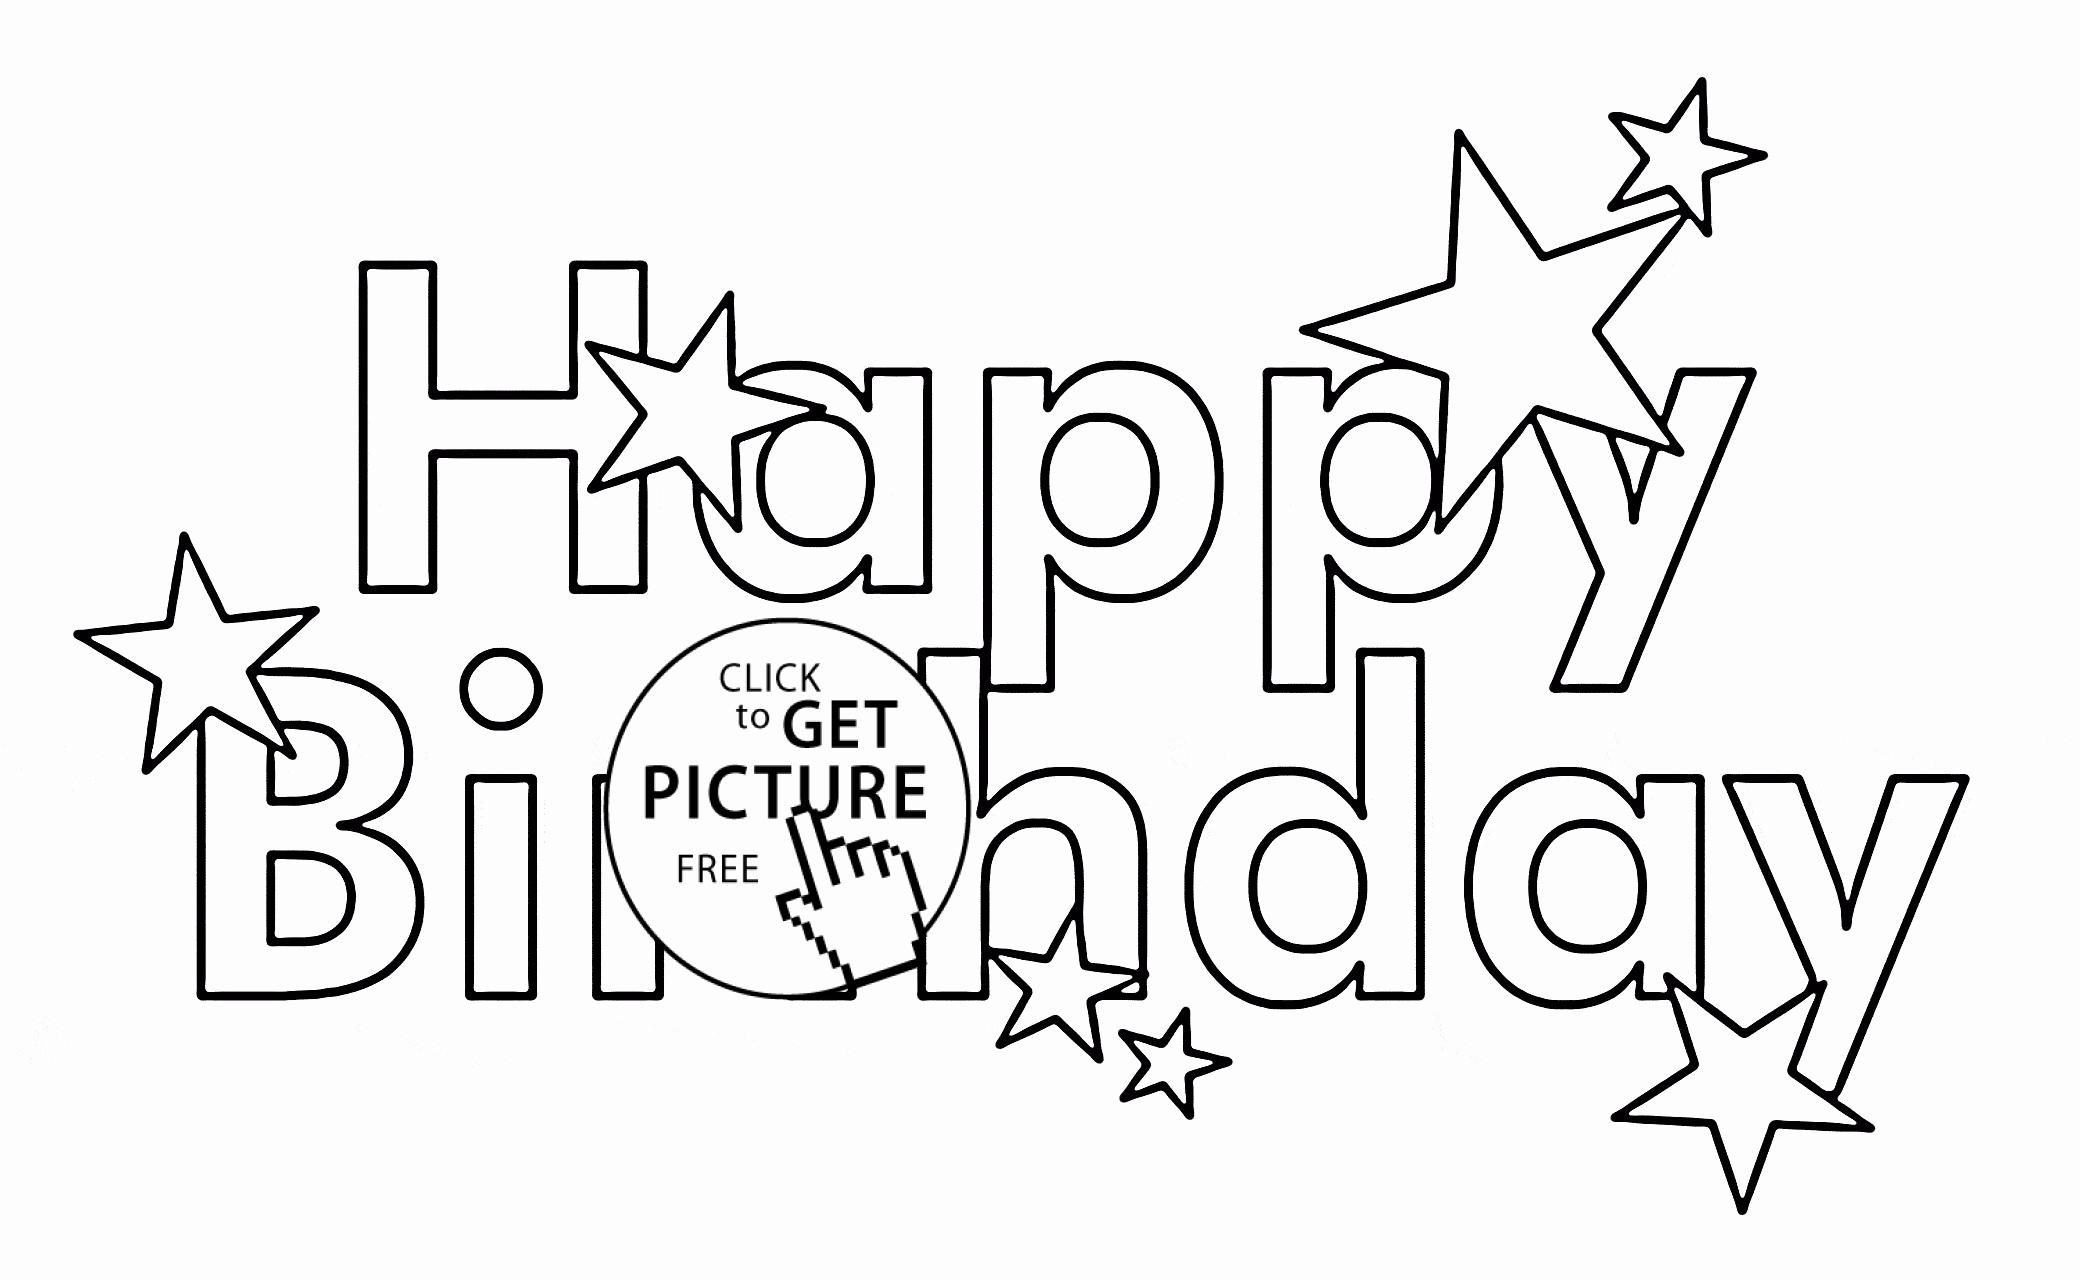 Happy Birthday Letters to Print Awesome Awesome Printable Cards for Kids to Color